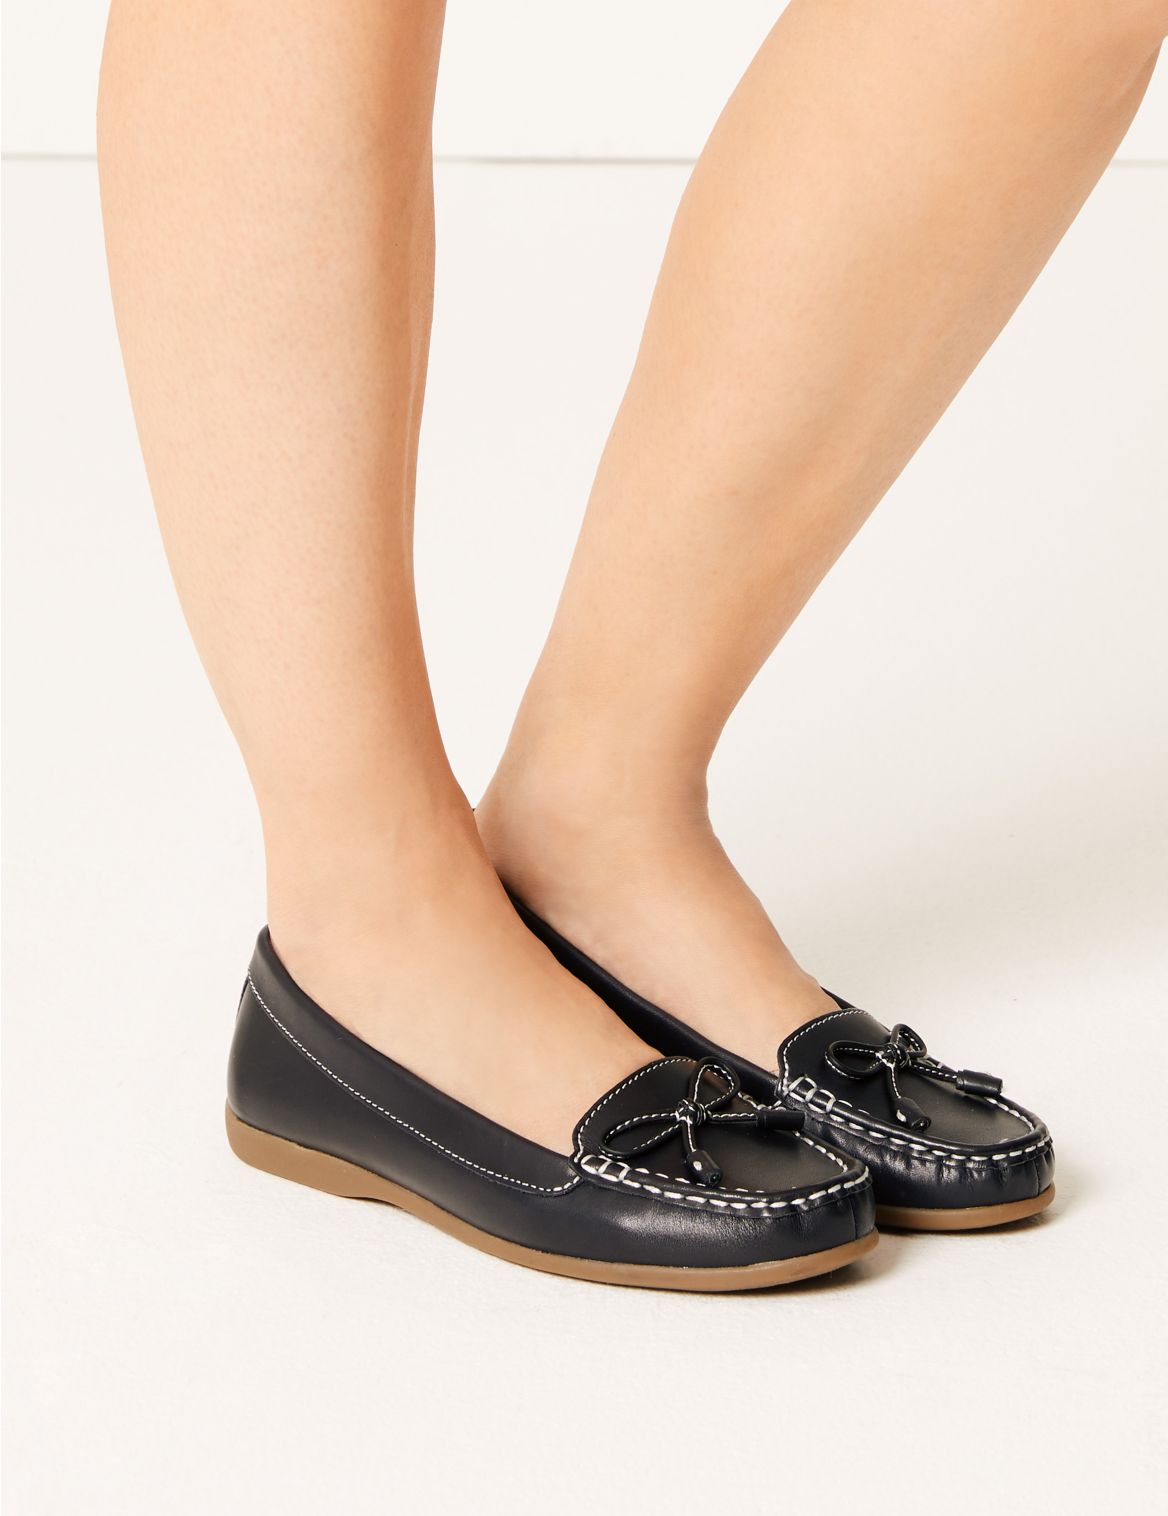 Leather Bow Boat Shoes navy